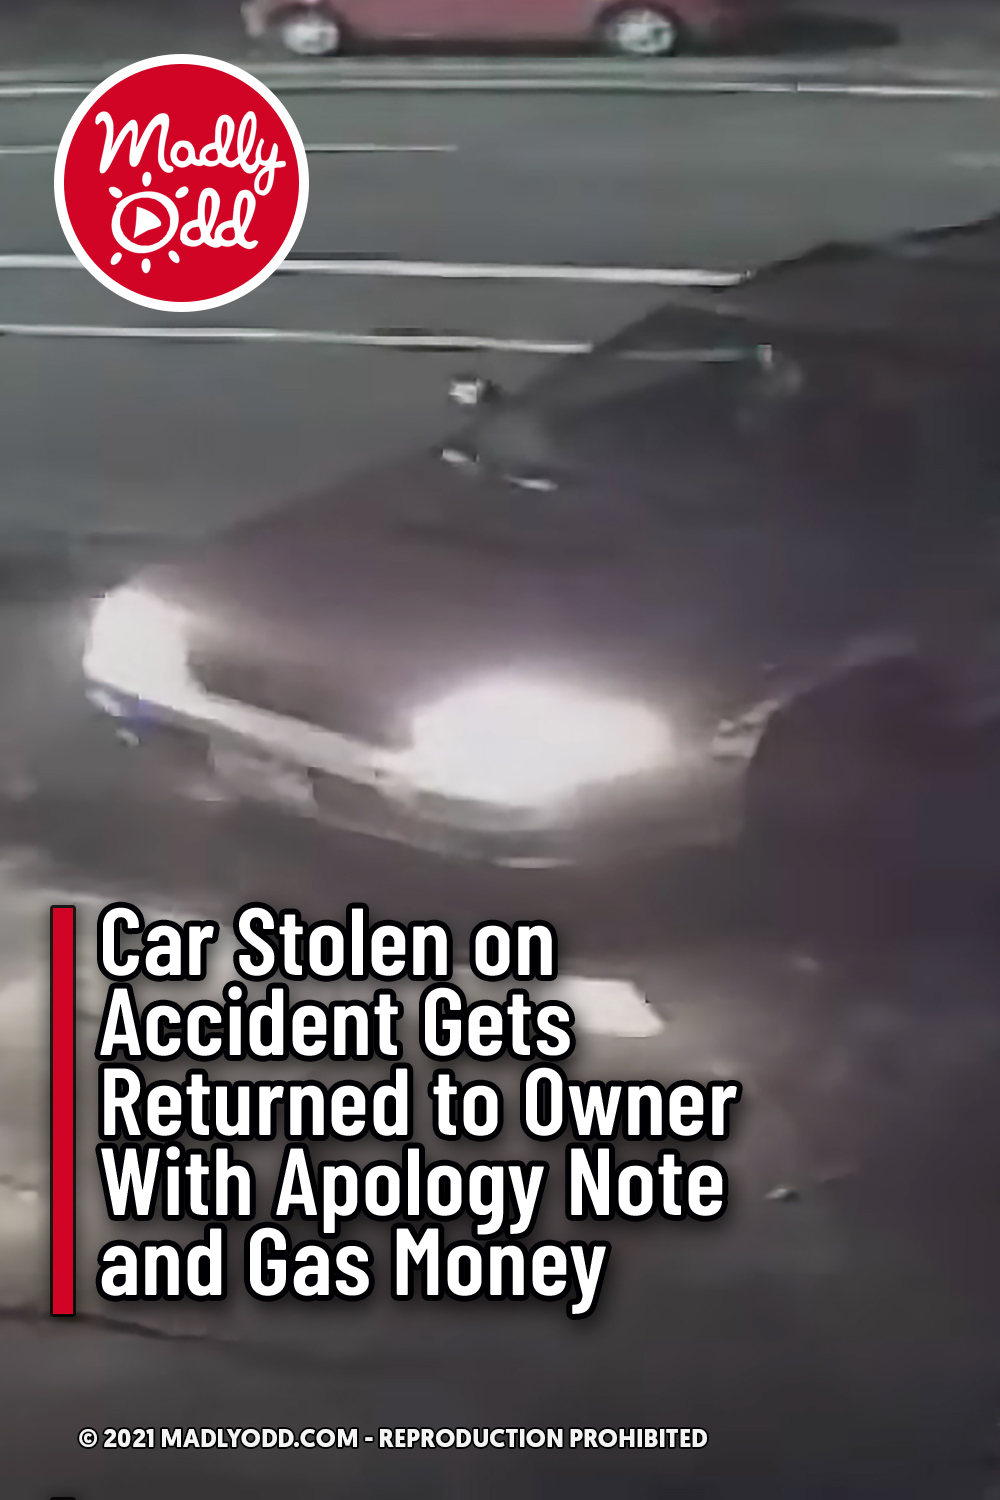 Car Stolen on Accident Gets Returned to Owner With Apology Note and Gas Money